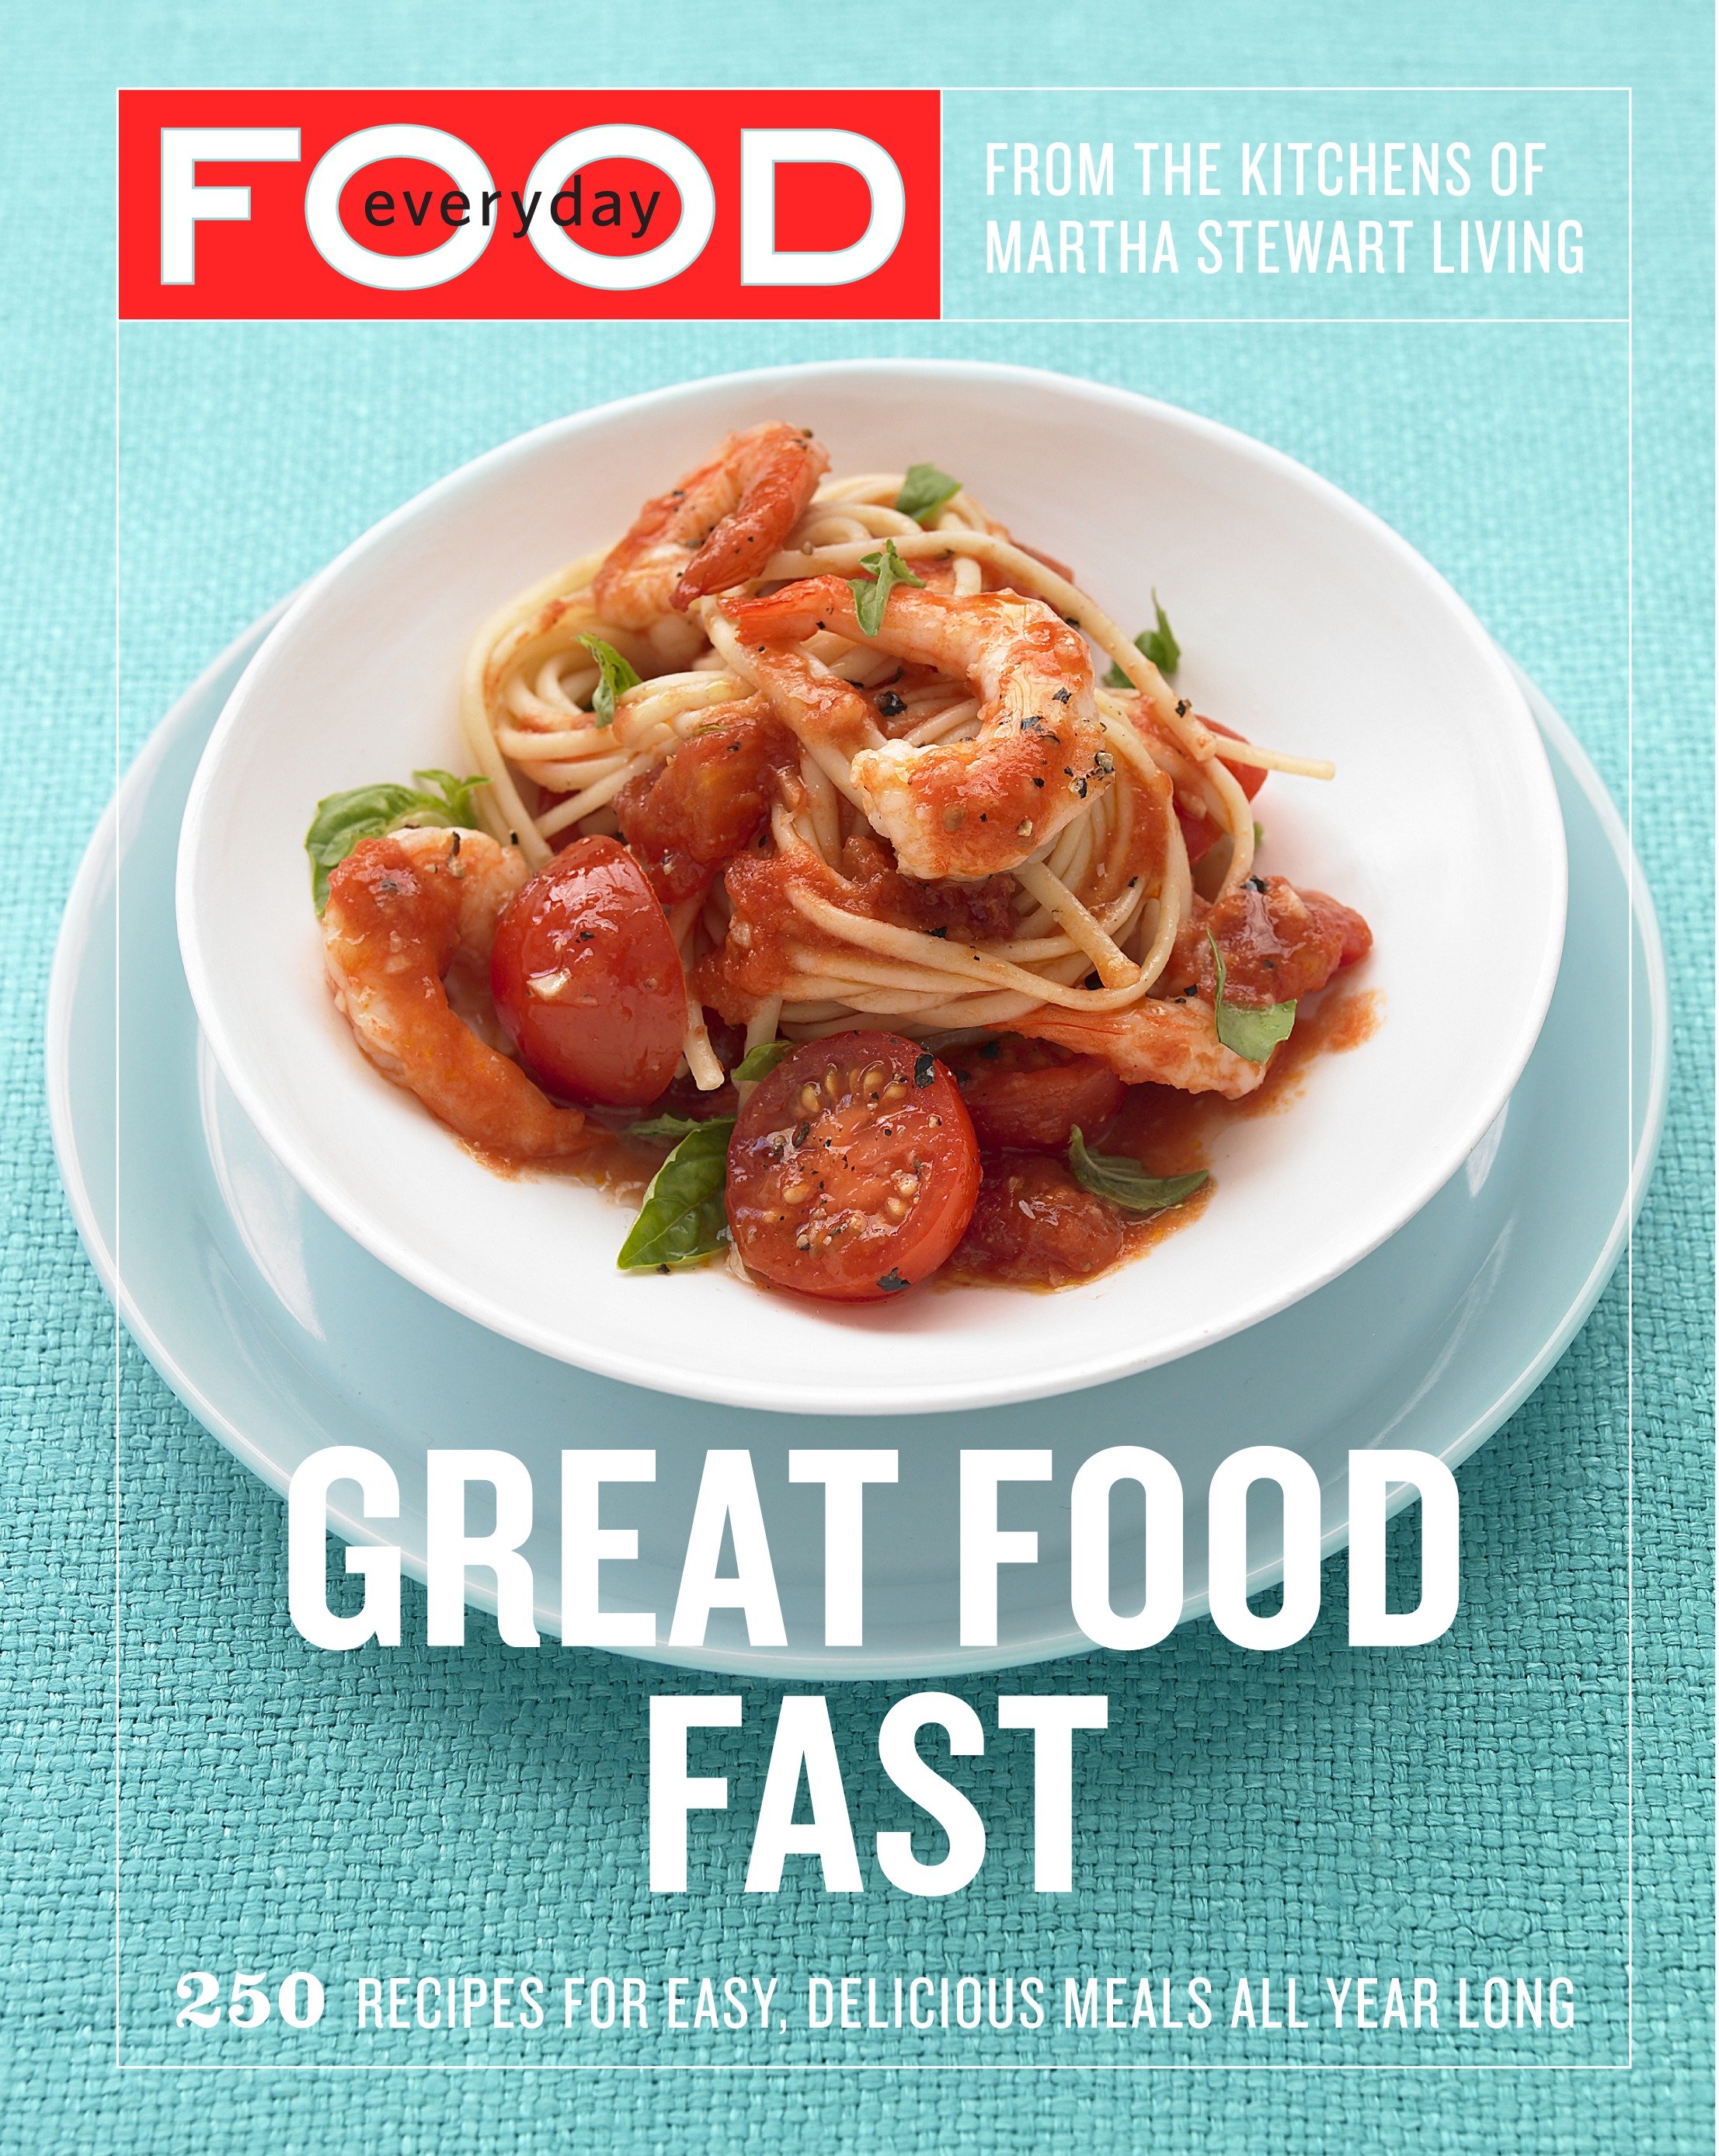 Everyday Food: Great Food Fast : 250 Recipes for Easy, Delicious Meals All Year Long: A Cookbook (Paperback) - image 1 of 1